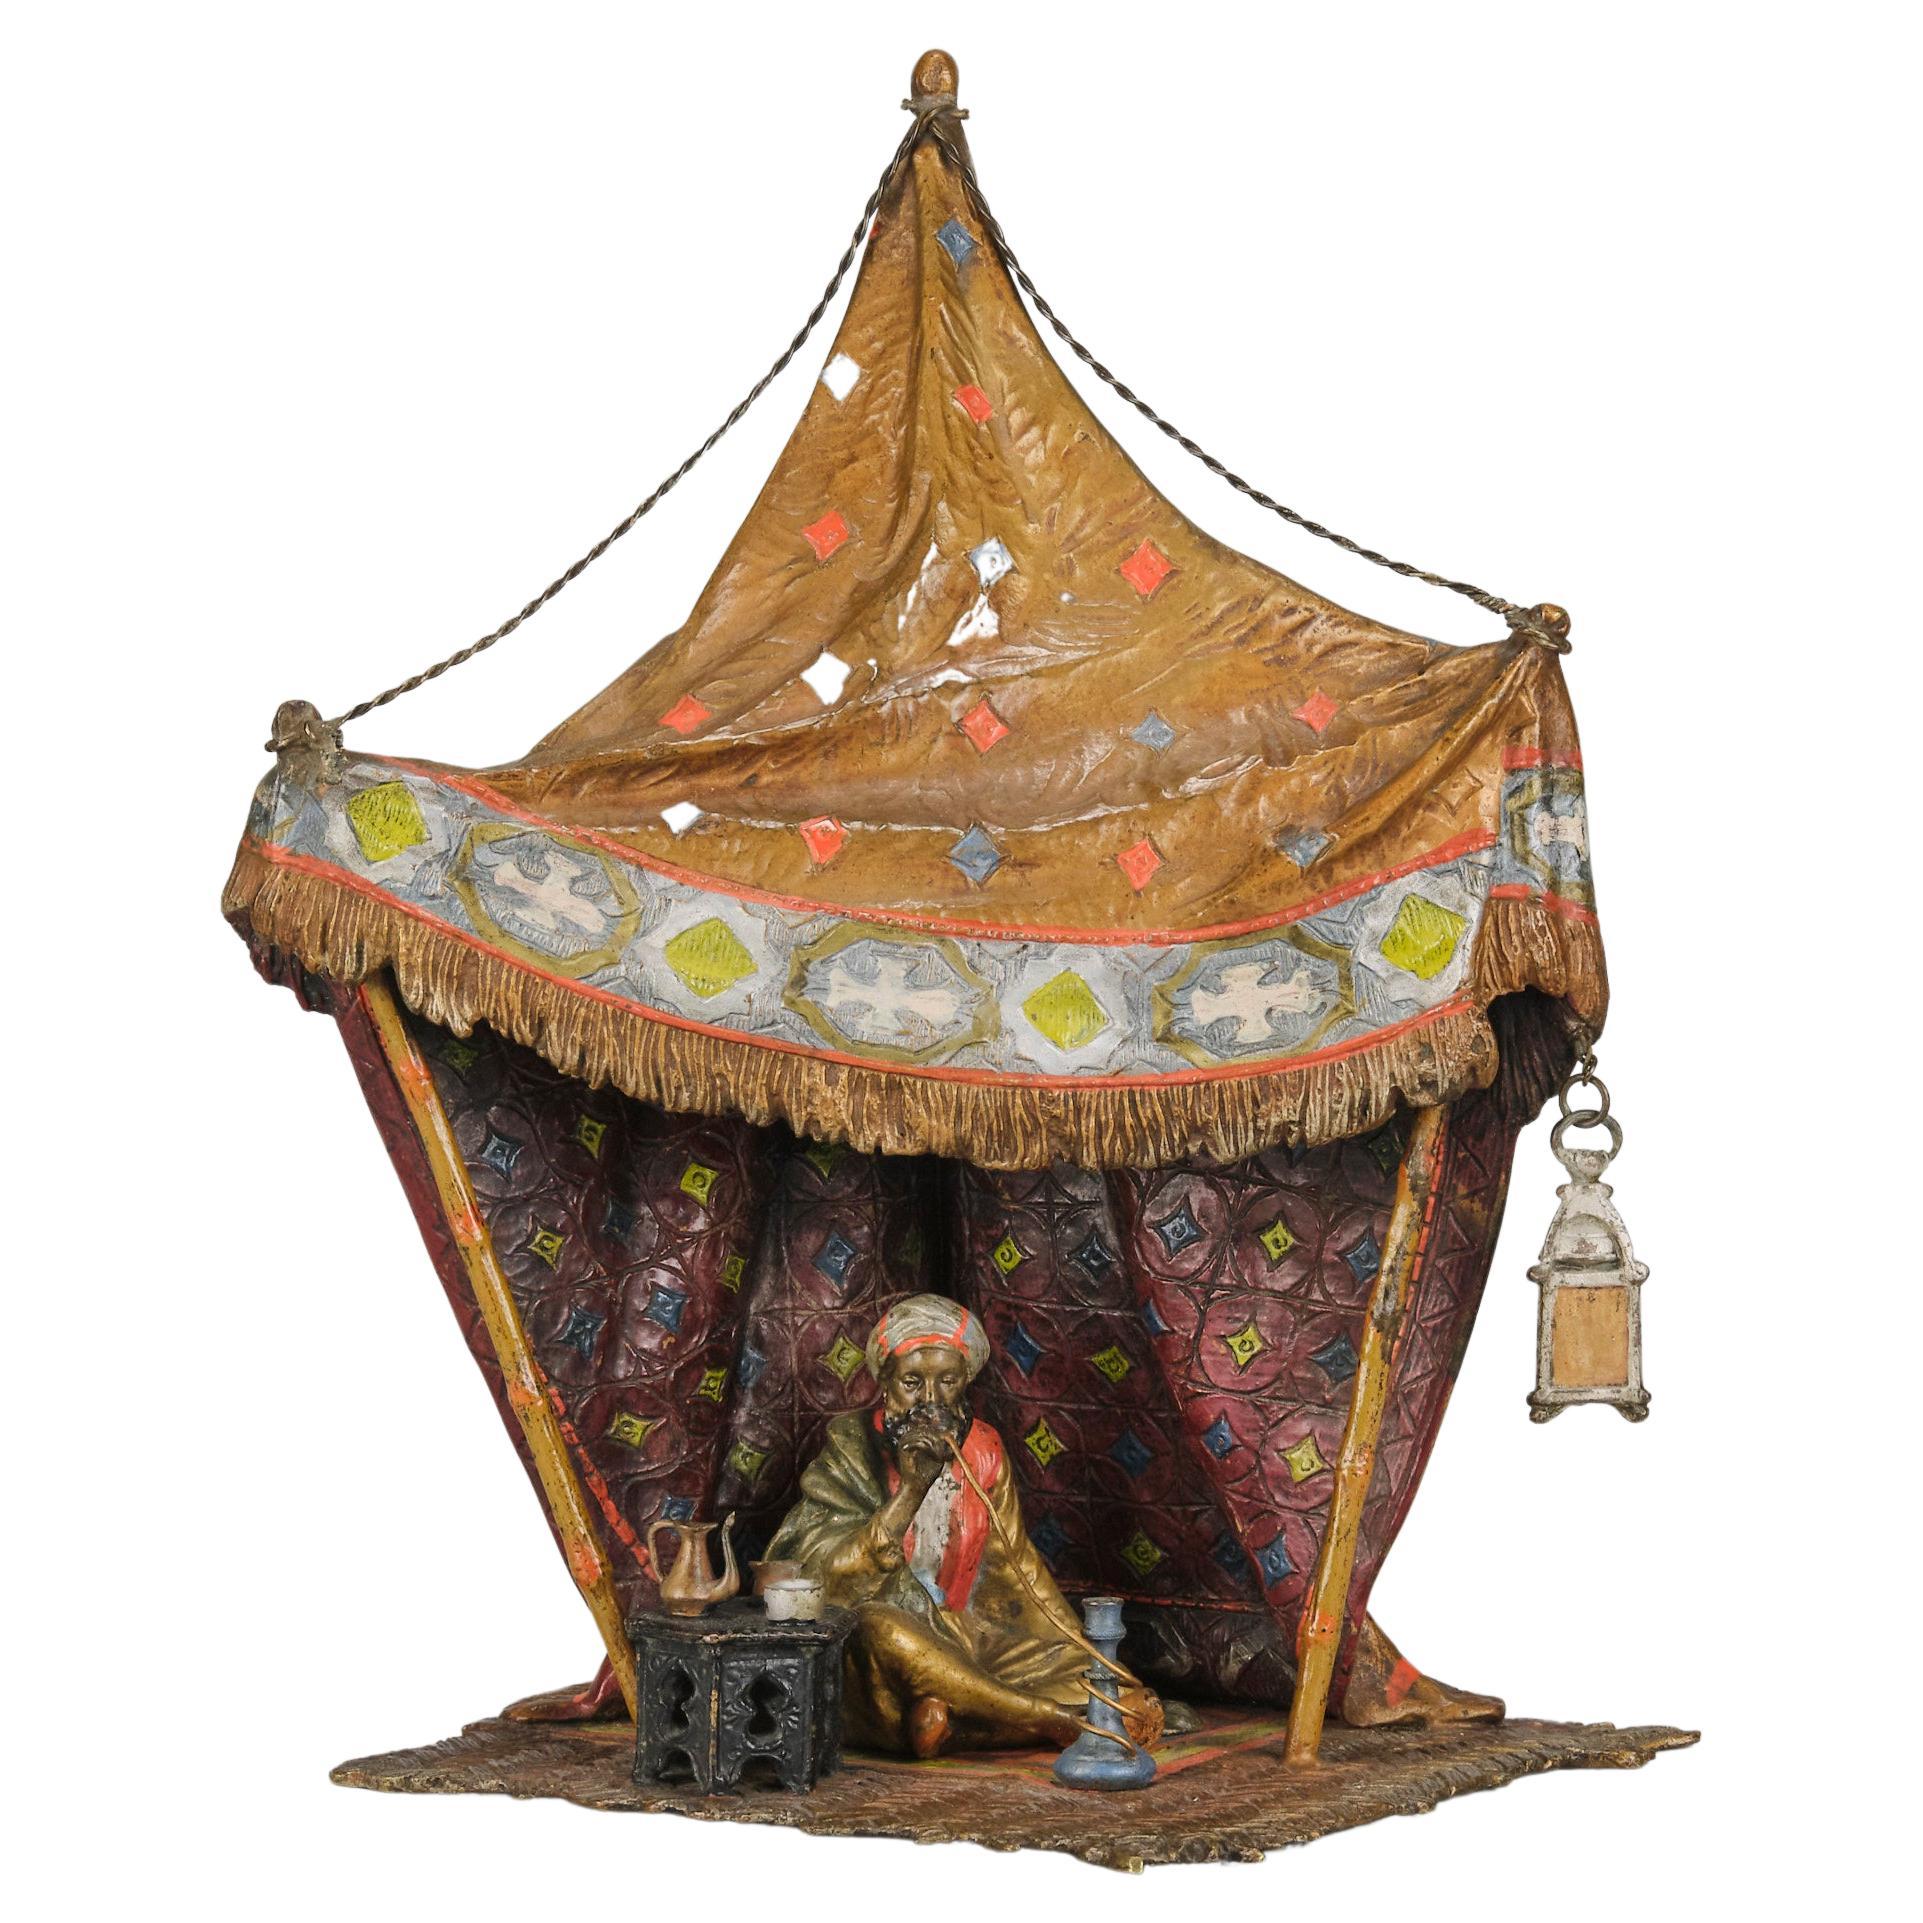 Early 20th Century Cold-Painted Bronze Entitled "Arab in Tent" by Franz Bergman